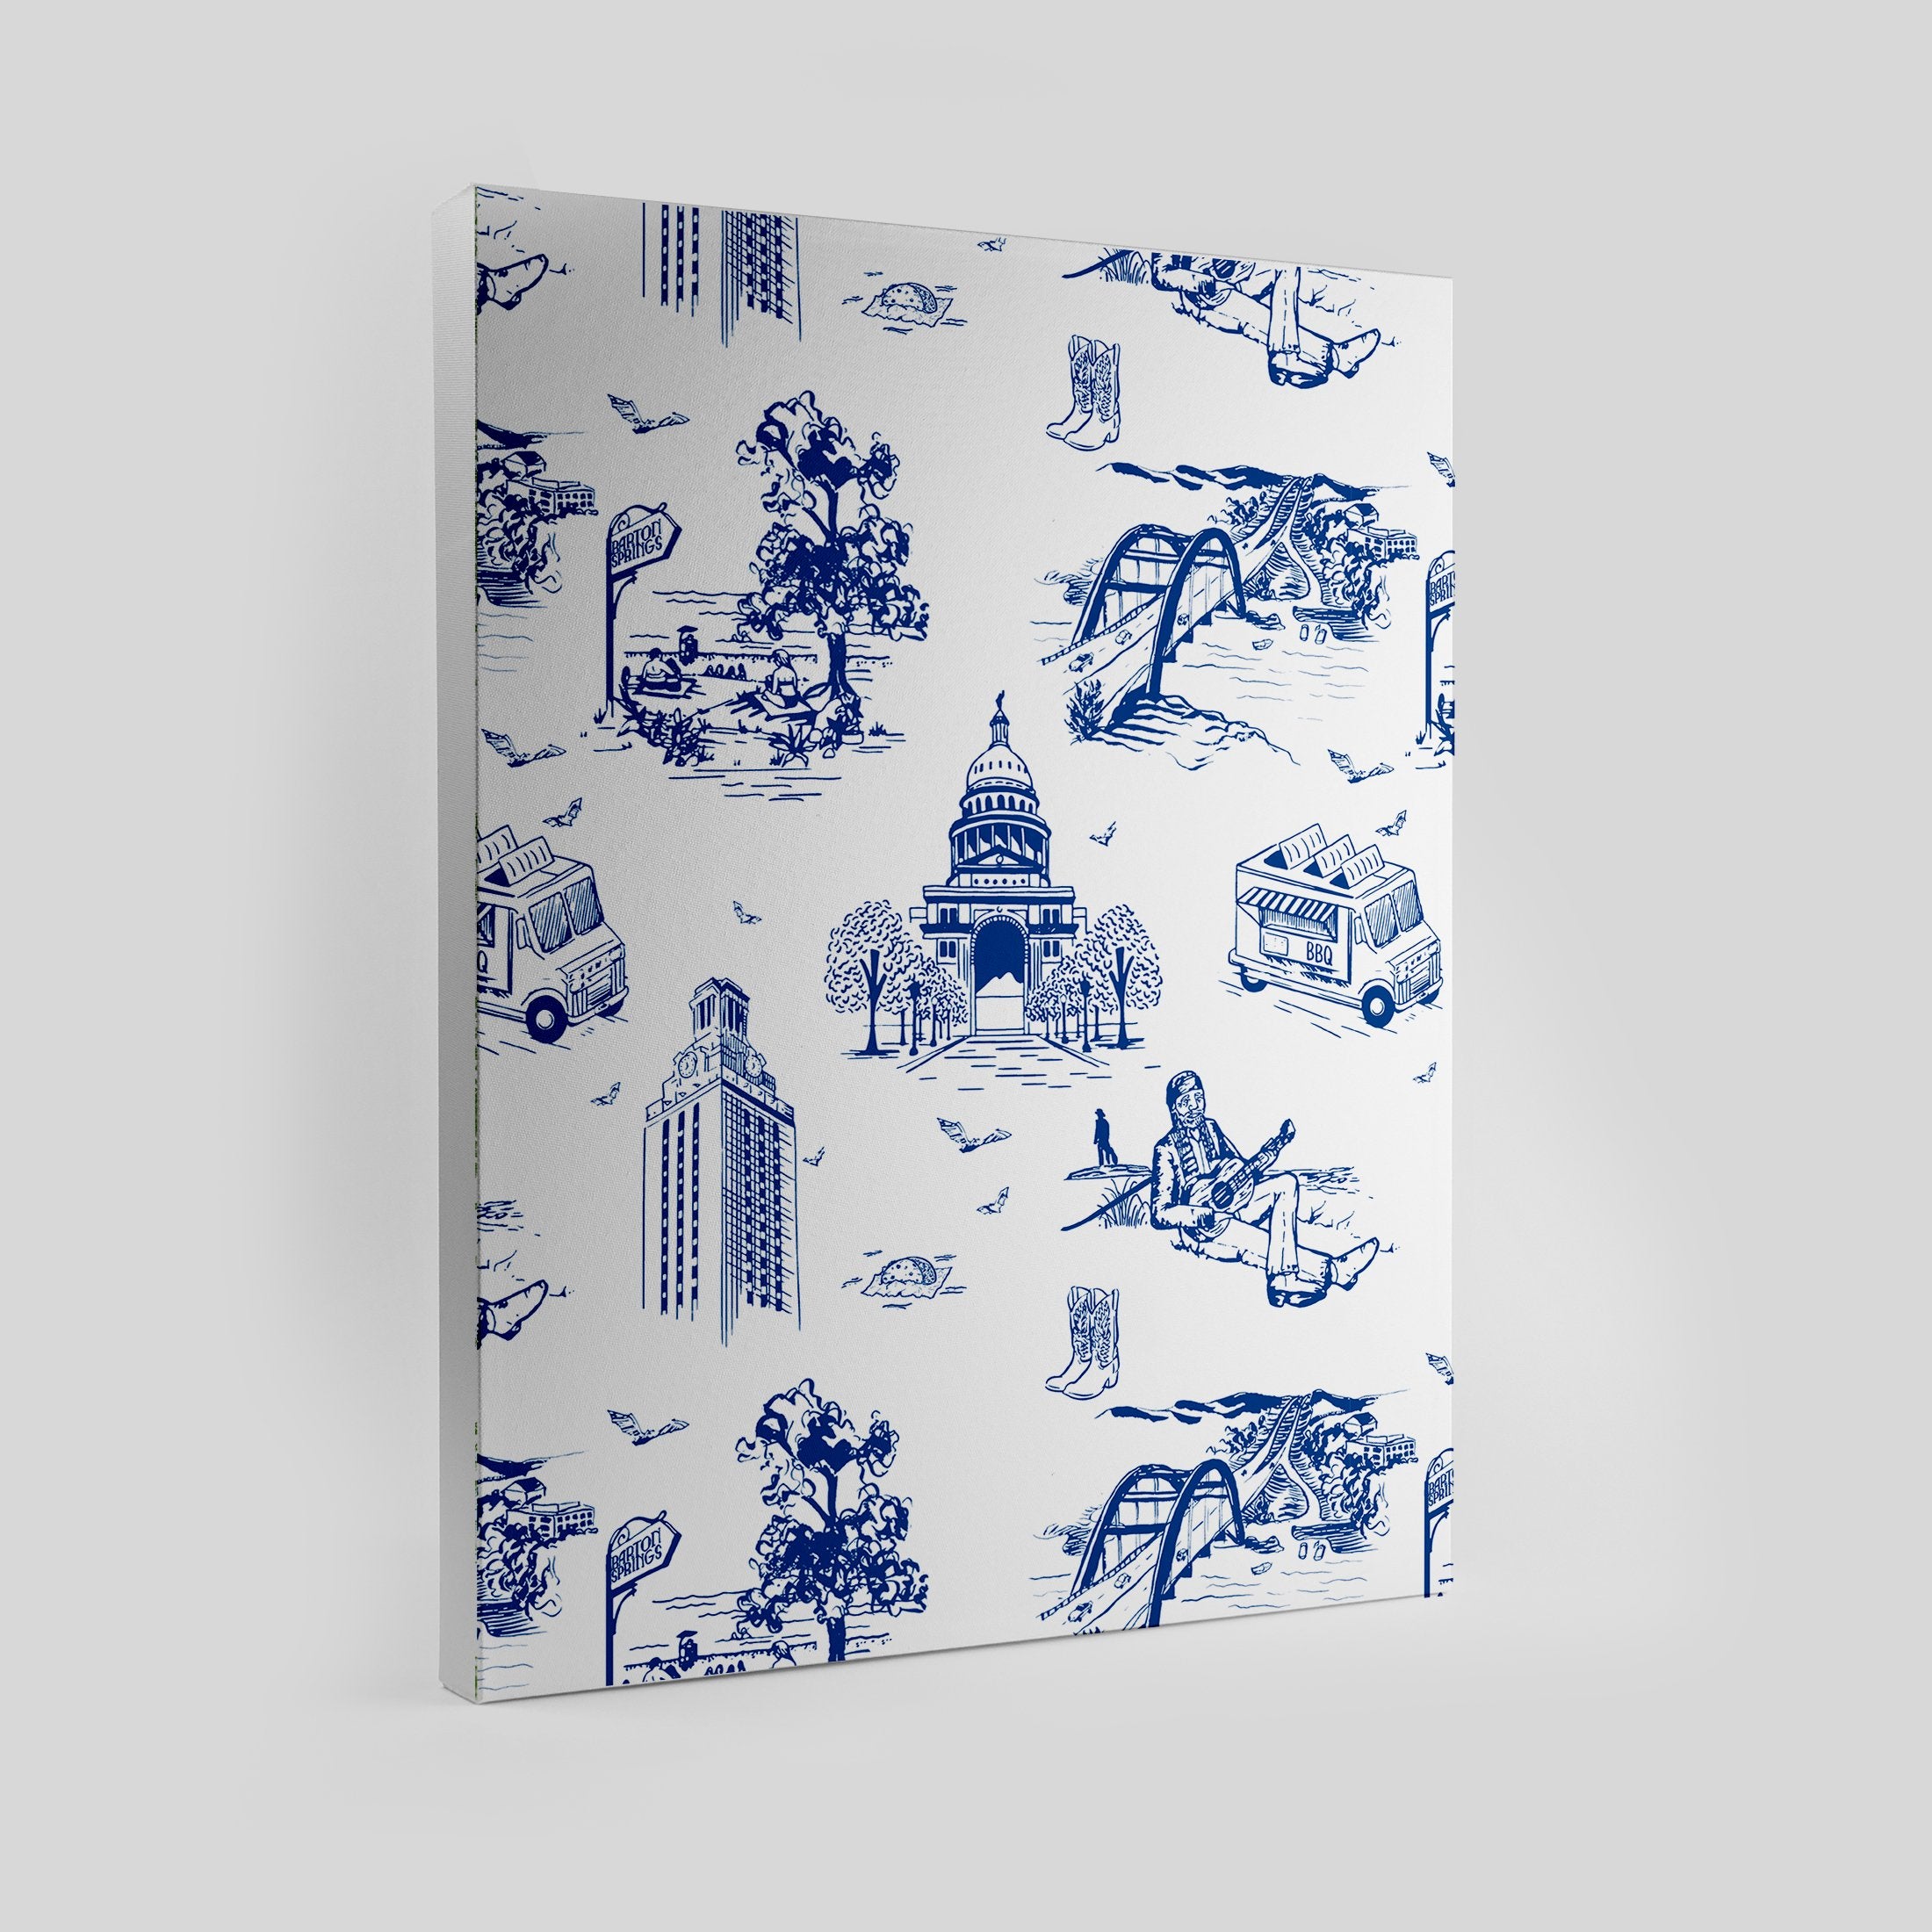 https://cdn.shopify.com/s/files/1/0665/3515/products/austin-toile-canvas-gallery-prints-navy-8x10-unframed-katie-kime-15507335544929.jpg?v=1660247647